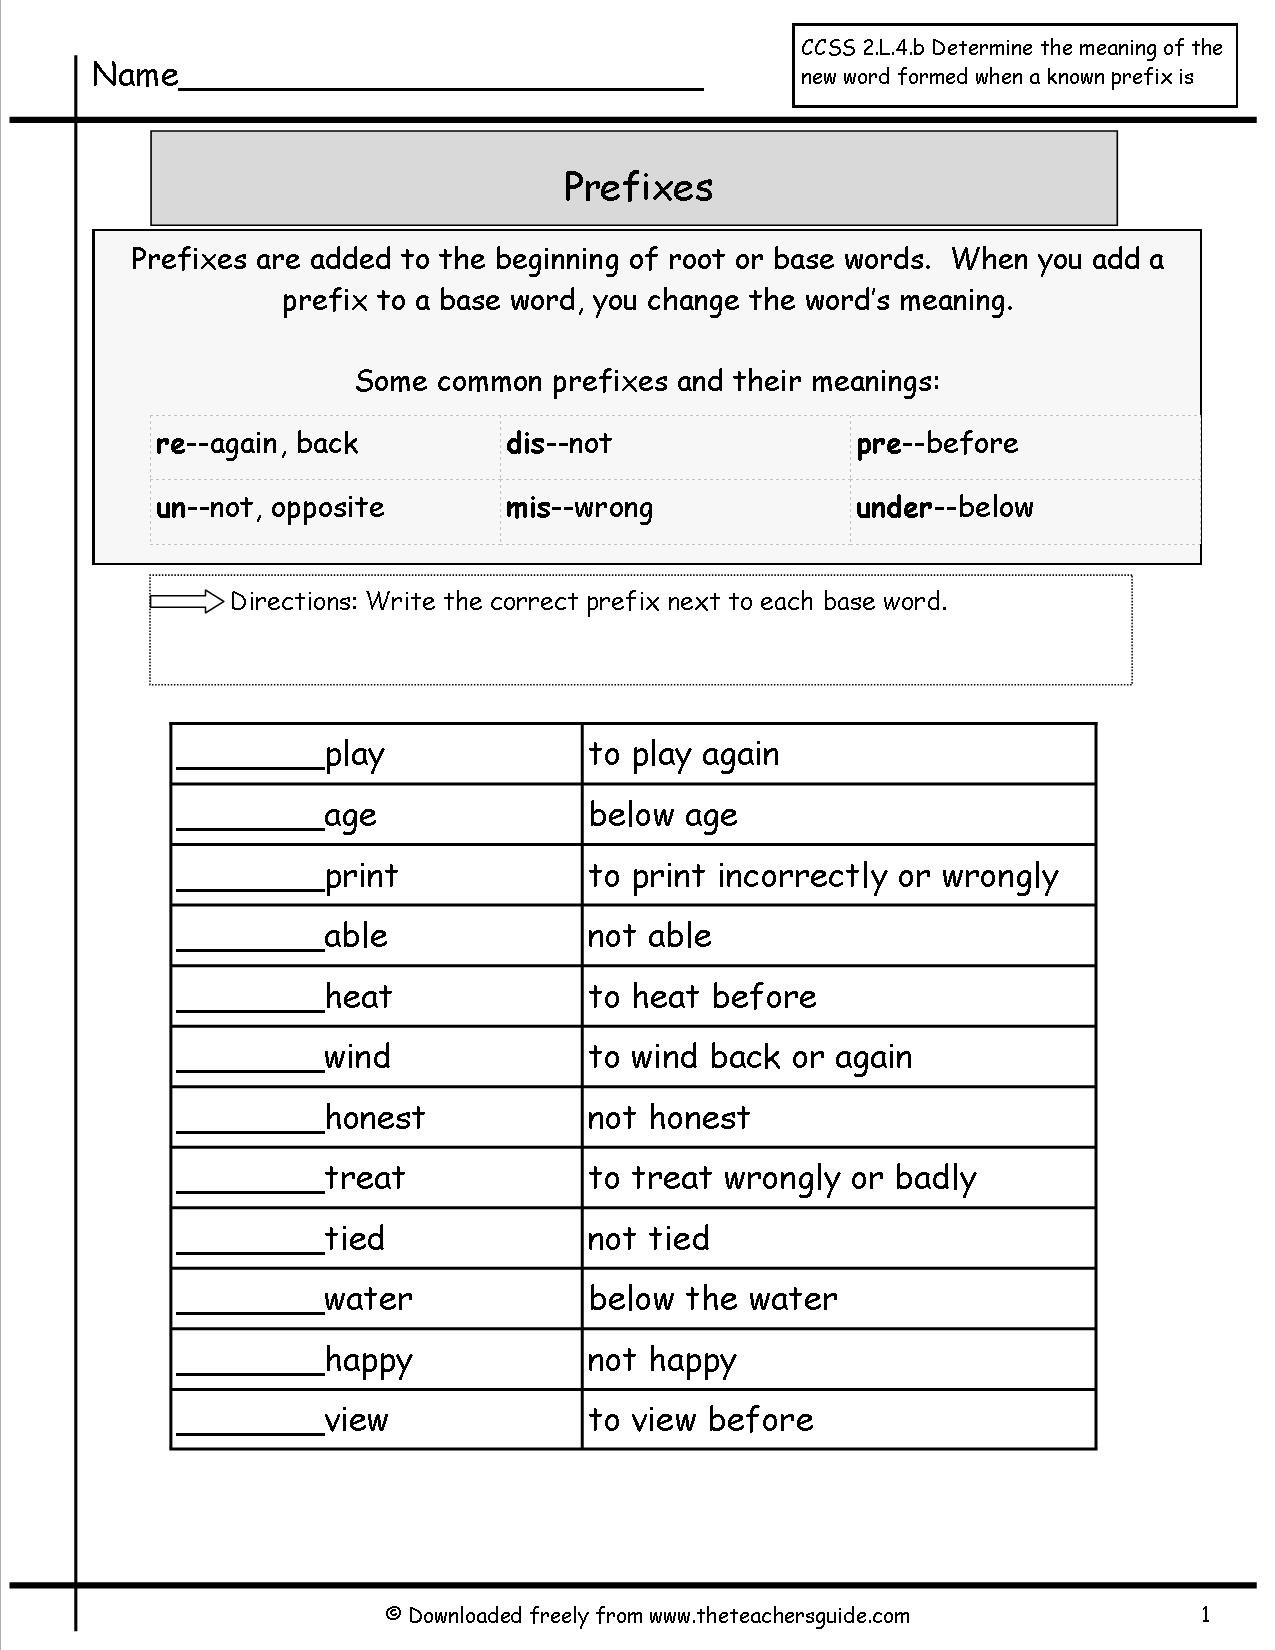 Suffix Worksheets 3rd Grade Free Prefixes and Suffixes Worksheets From the Teacher S Guide